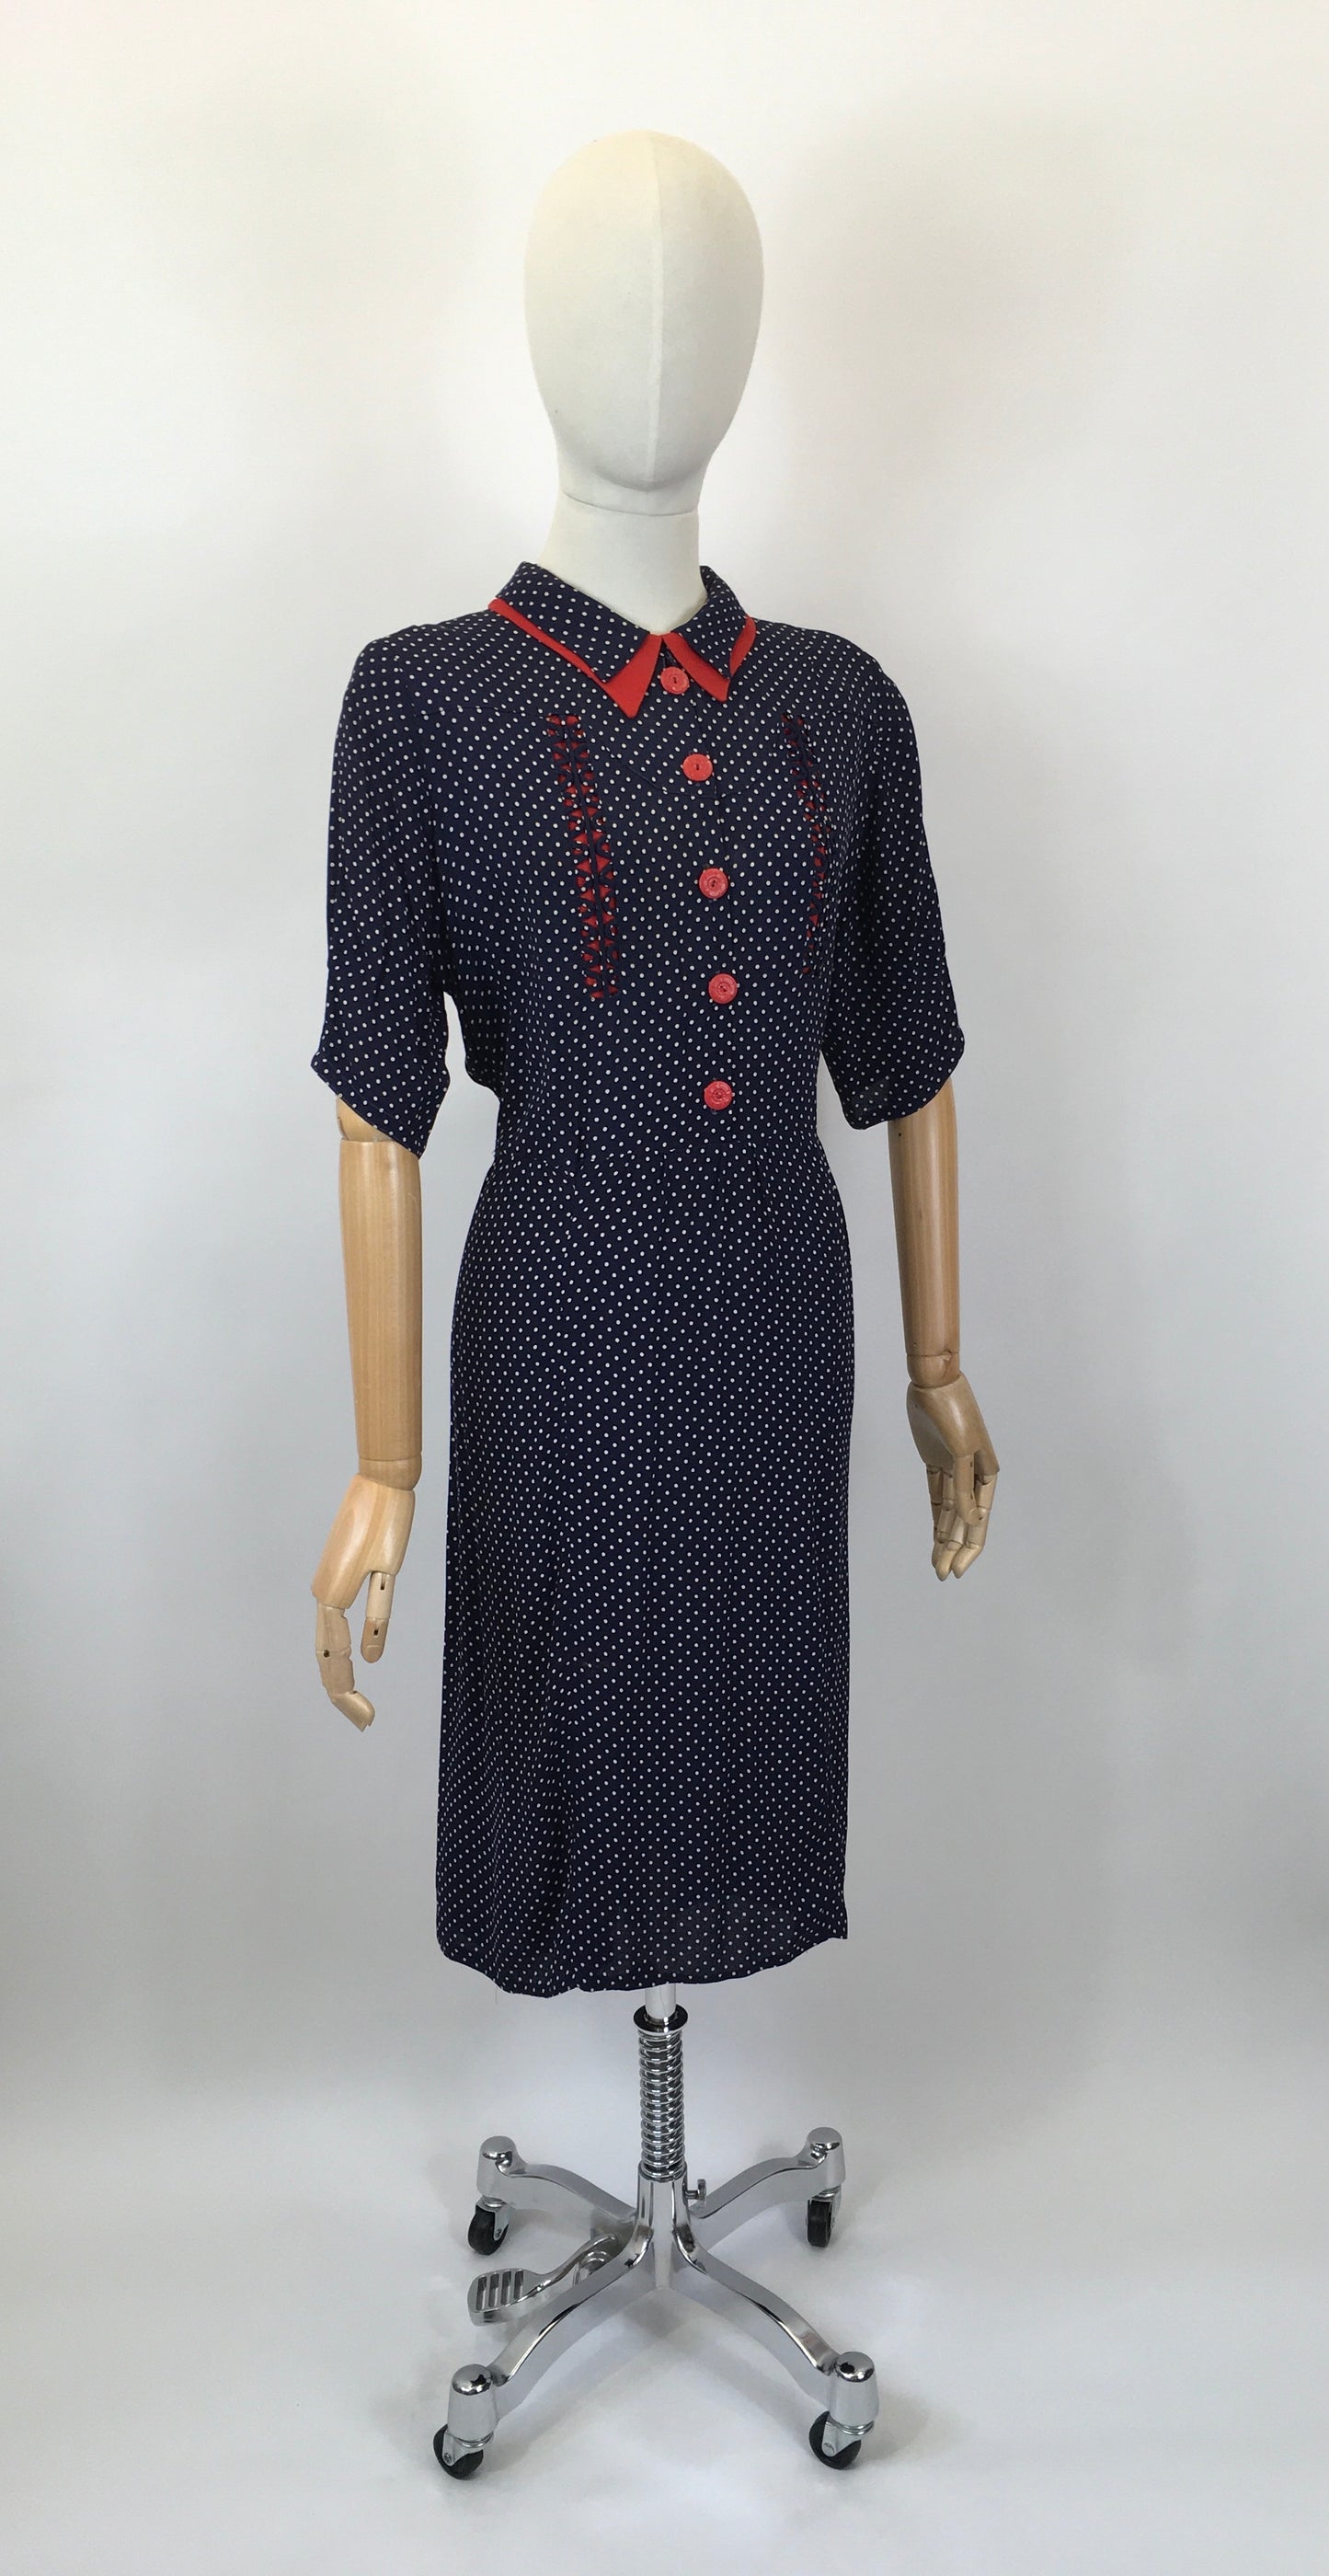 Original 1940's Sensational Volup Rayon Dress - In Navy, White & Red with Contrast Fretwork Embelishment